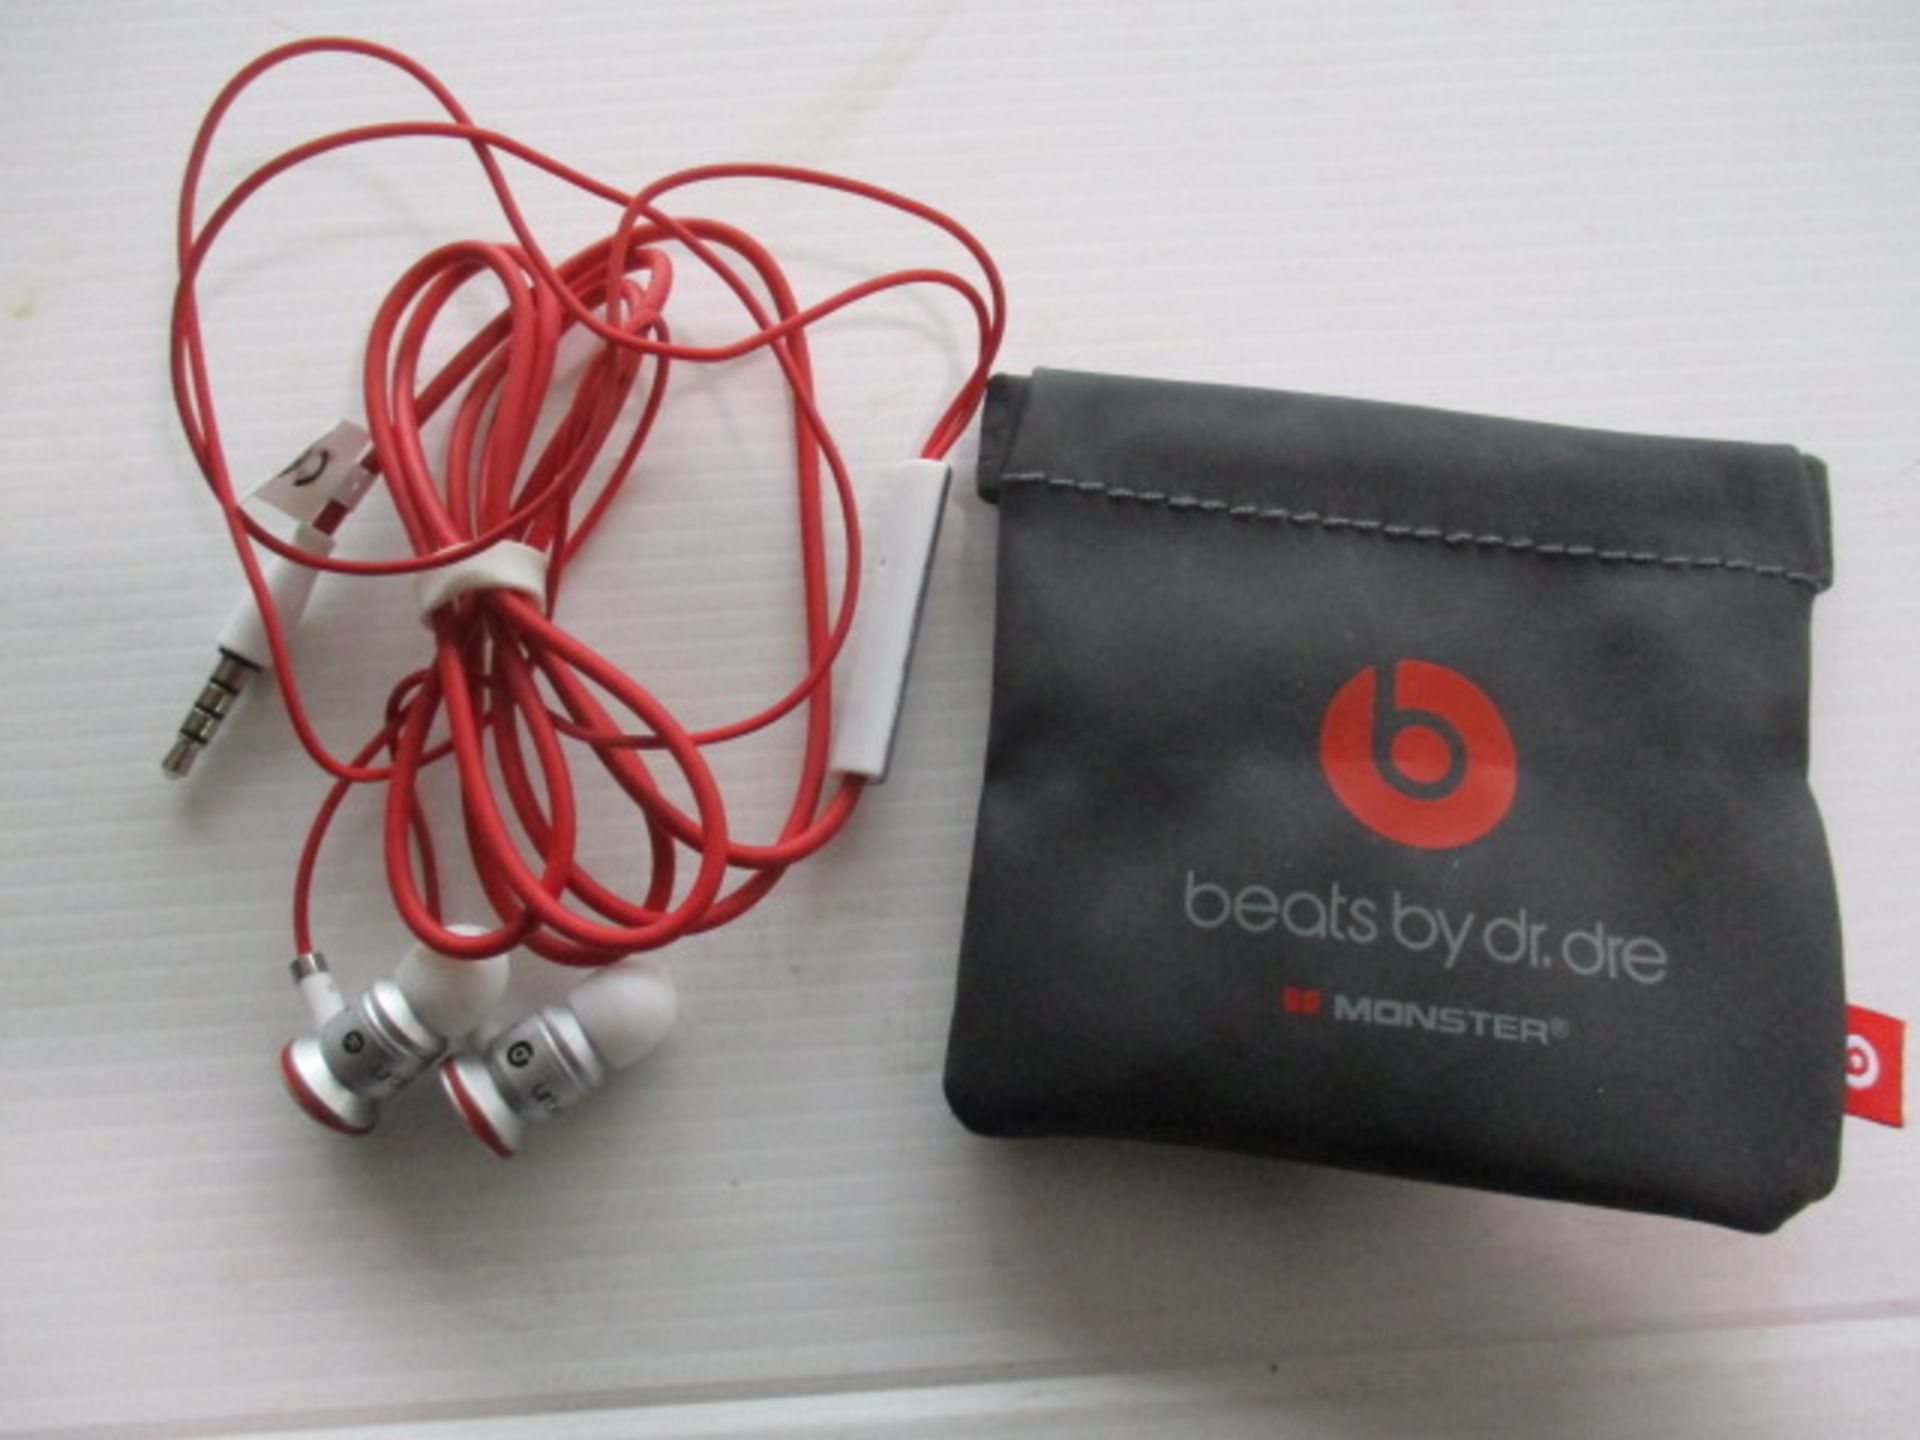 Beats by Dre Monster Headfones as pictured